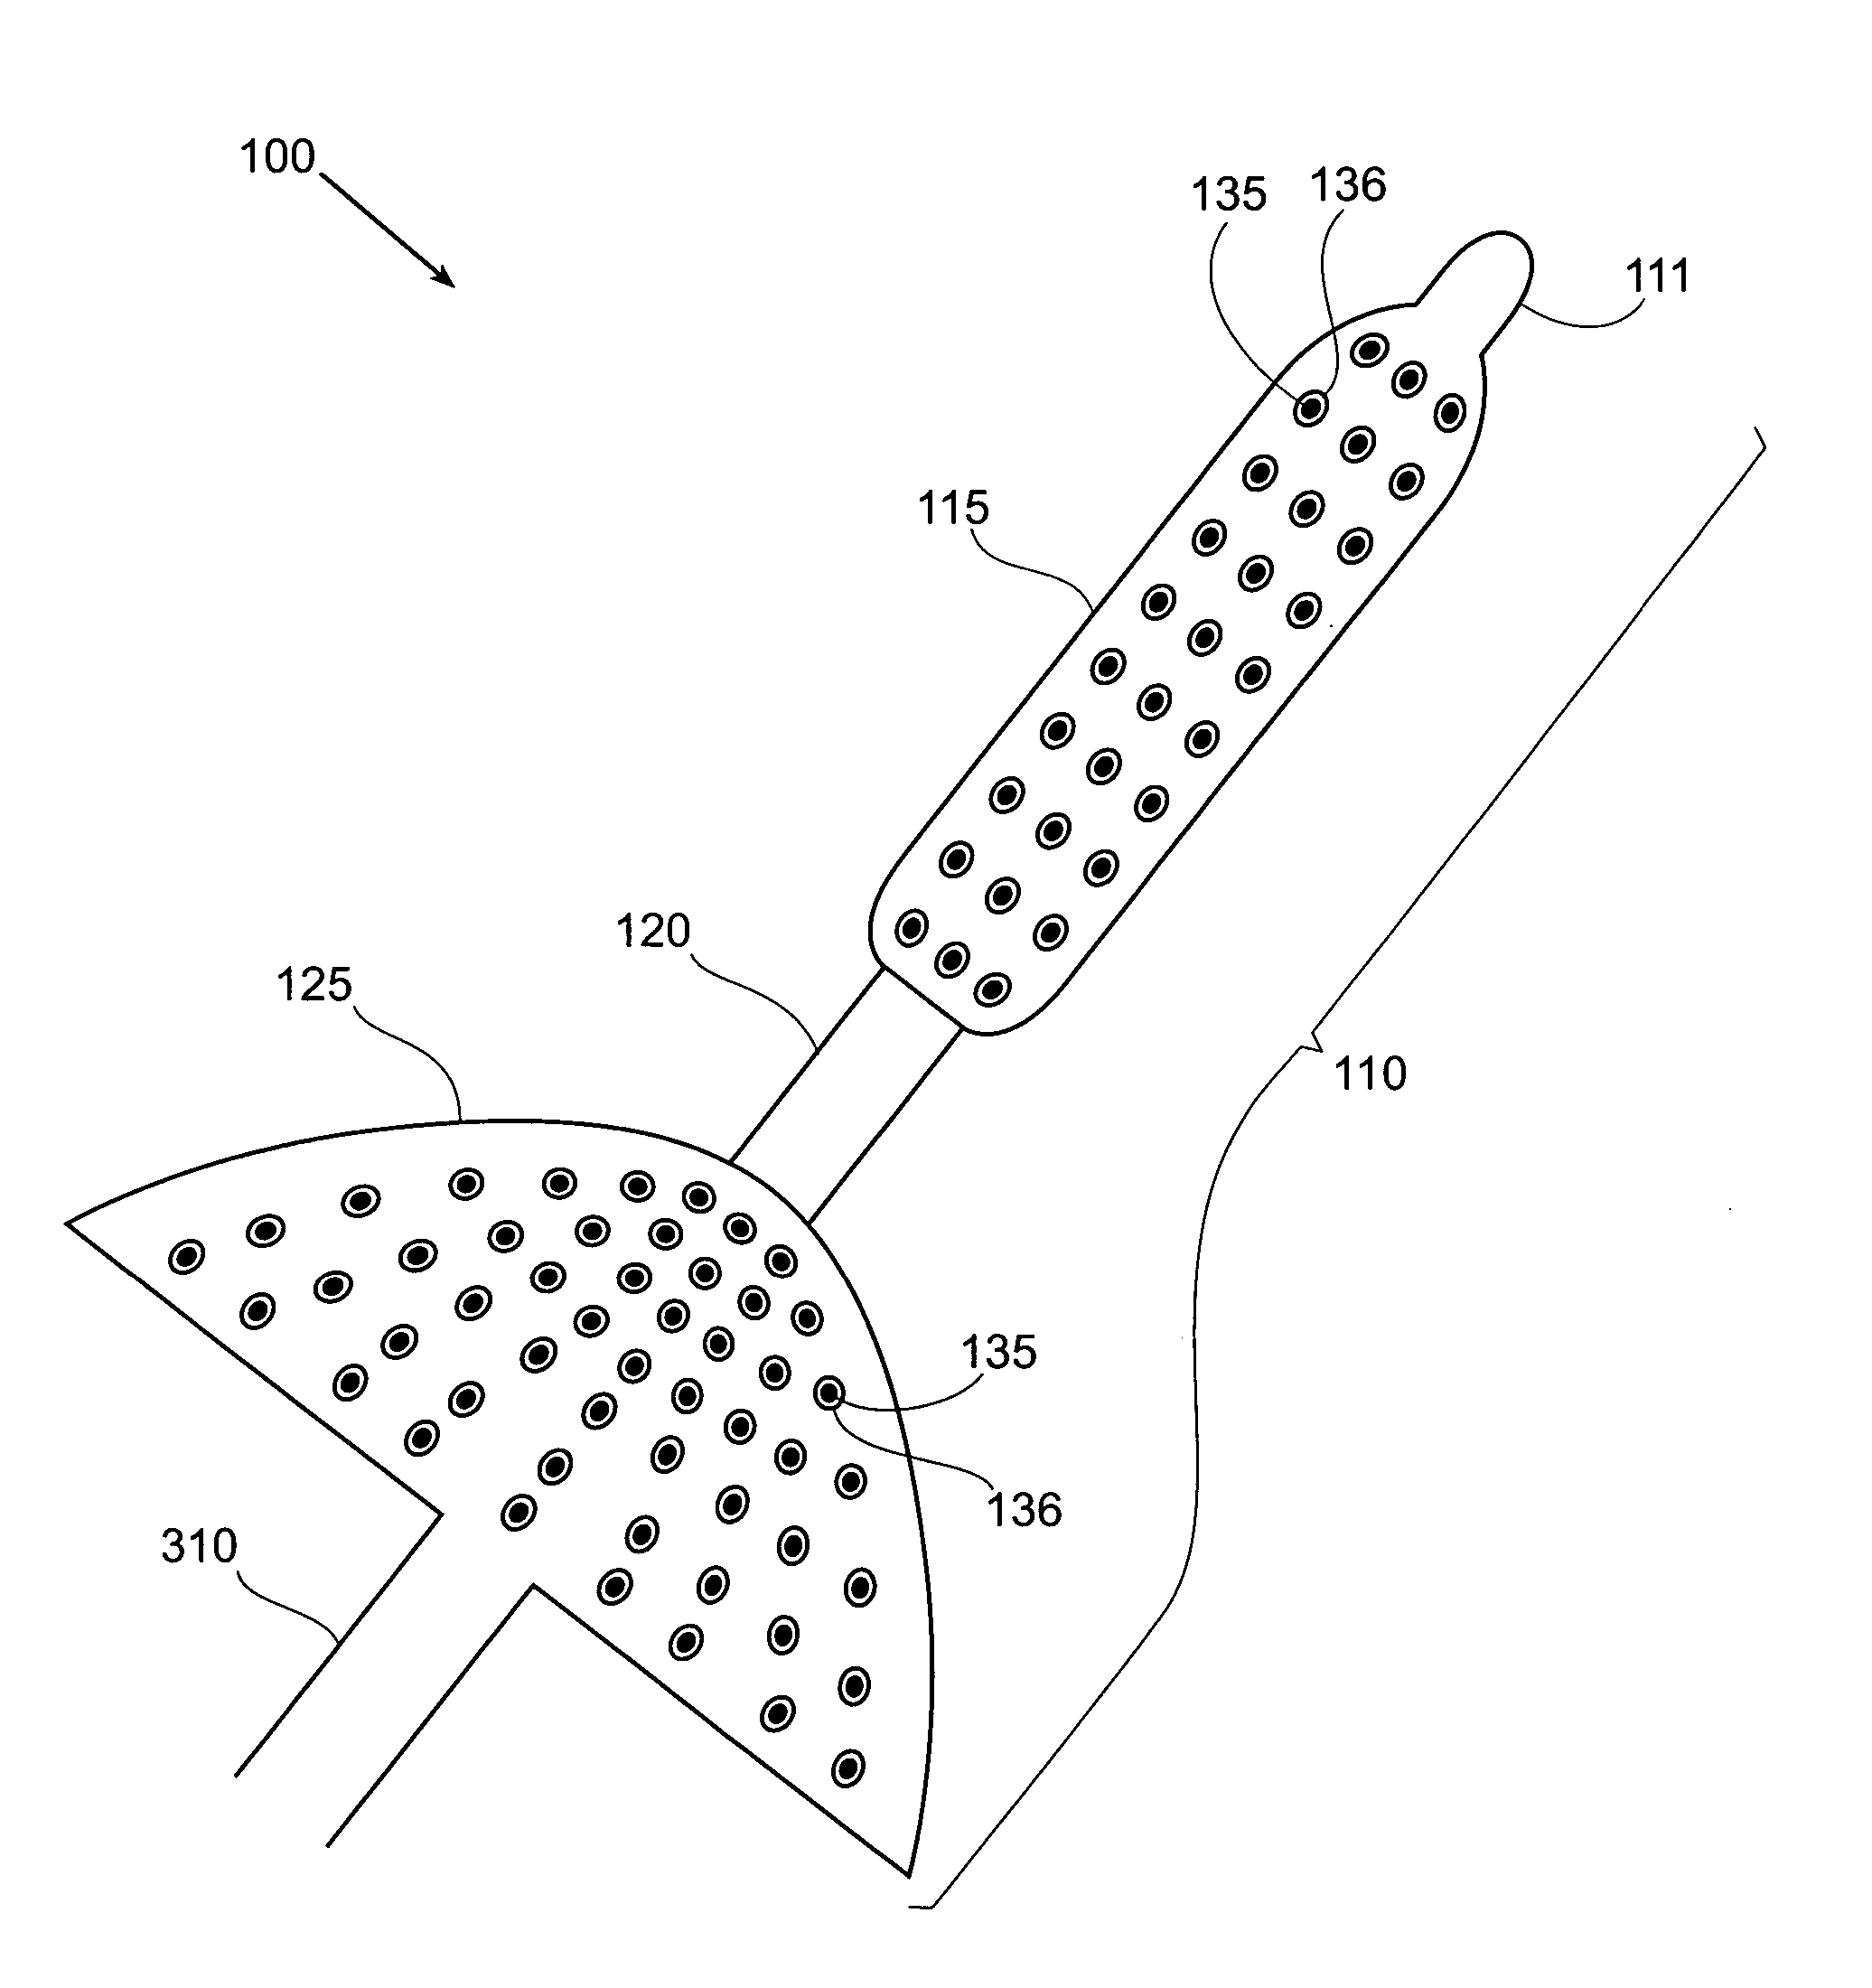 Surgical weight control device